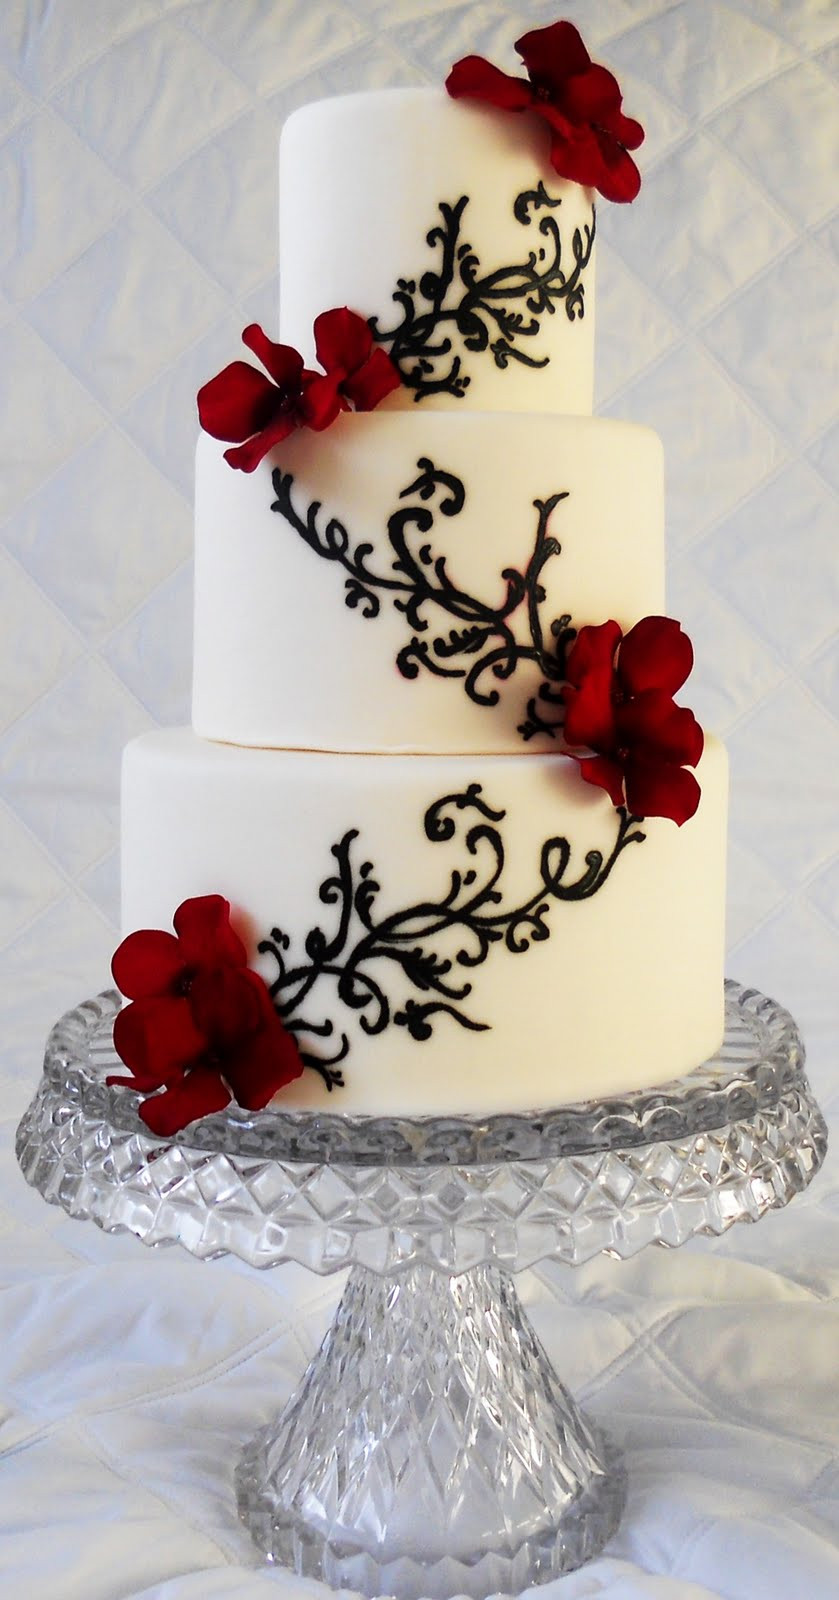 Red Black White Wedding Cakes
 Memorable Wedding Find the Best Red Black and White